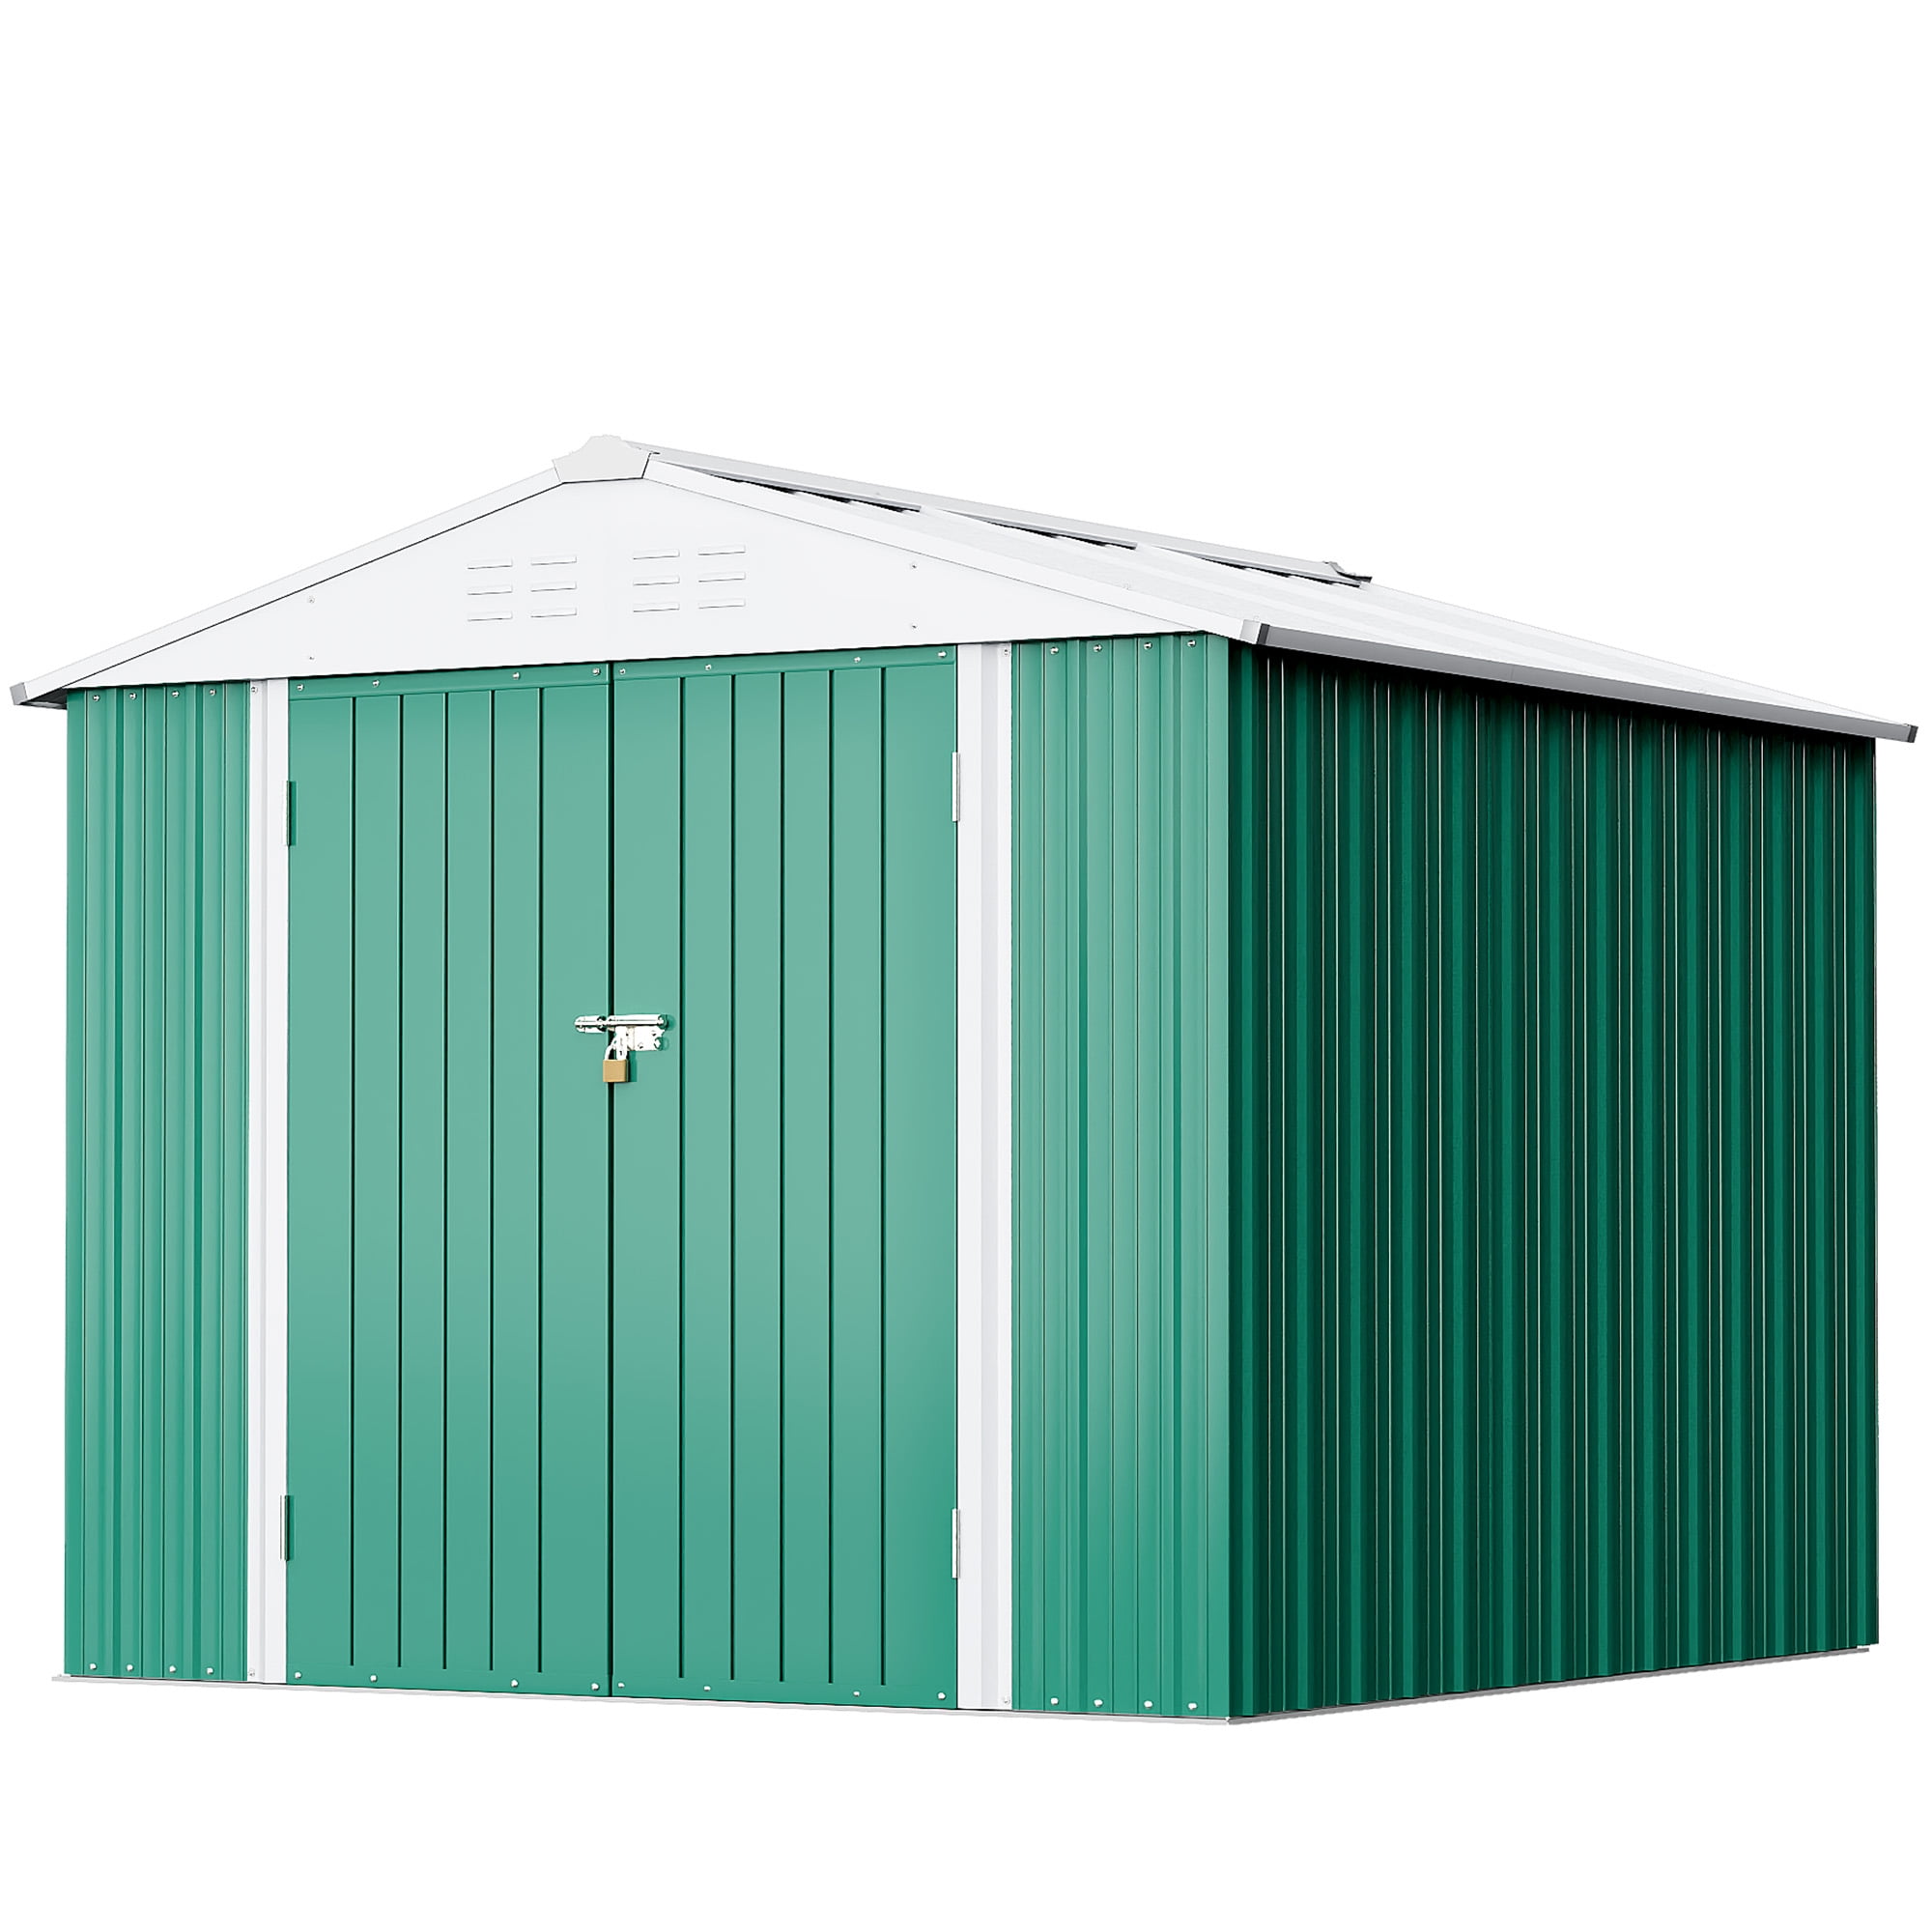 Vongrasig 5 x 3 x 6 FT Outdoor Storage Shed Clearance with Lockable Door  Metal Garden Shed Steel Anti-Corrosion Storage House Waterproof Tool Shed  for